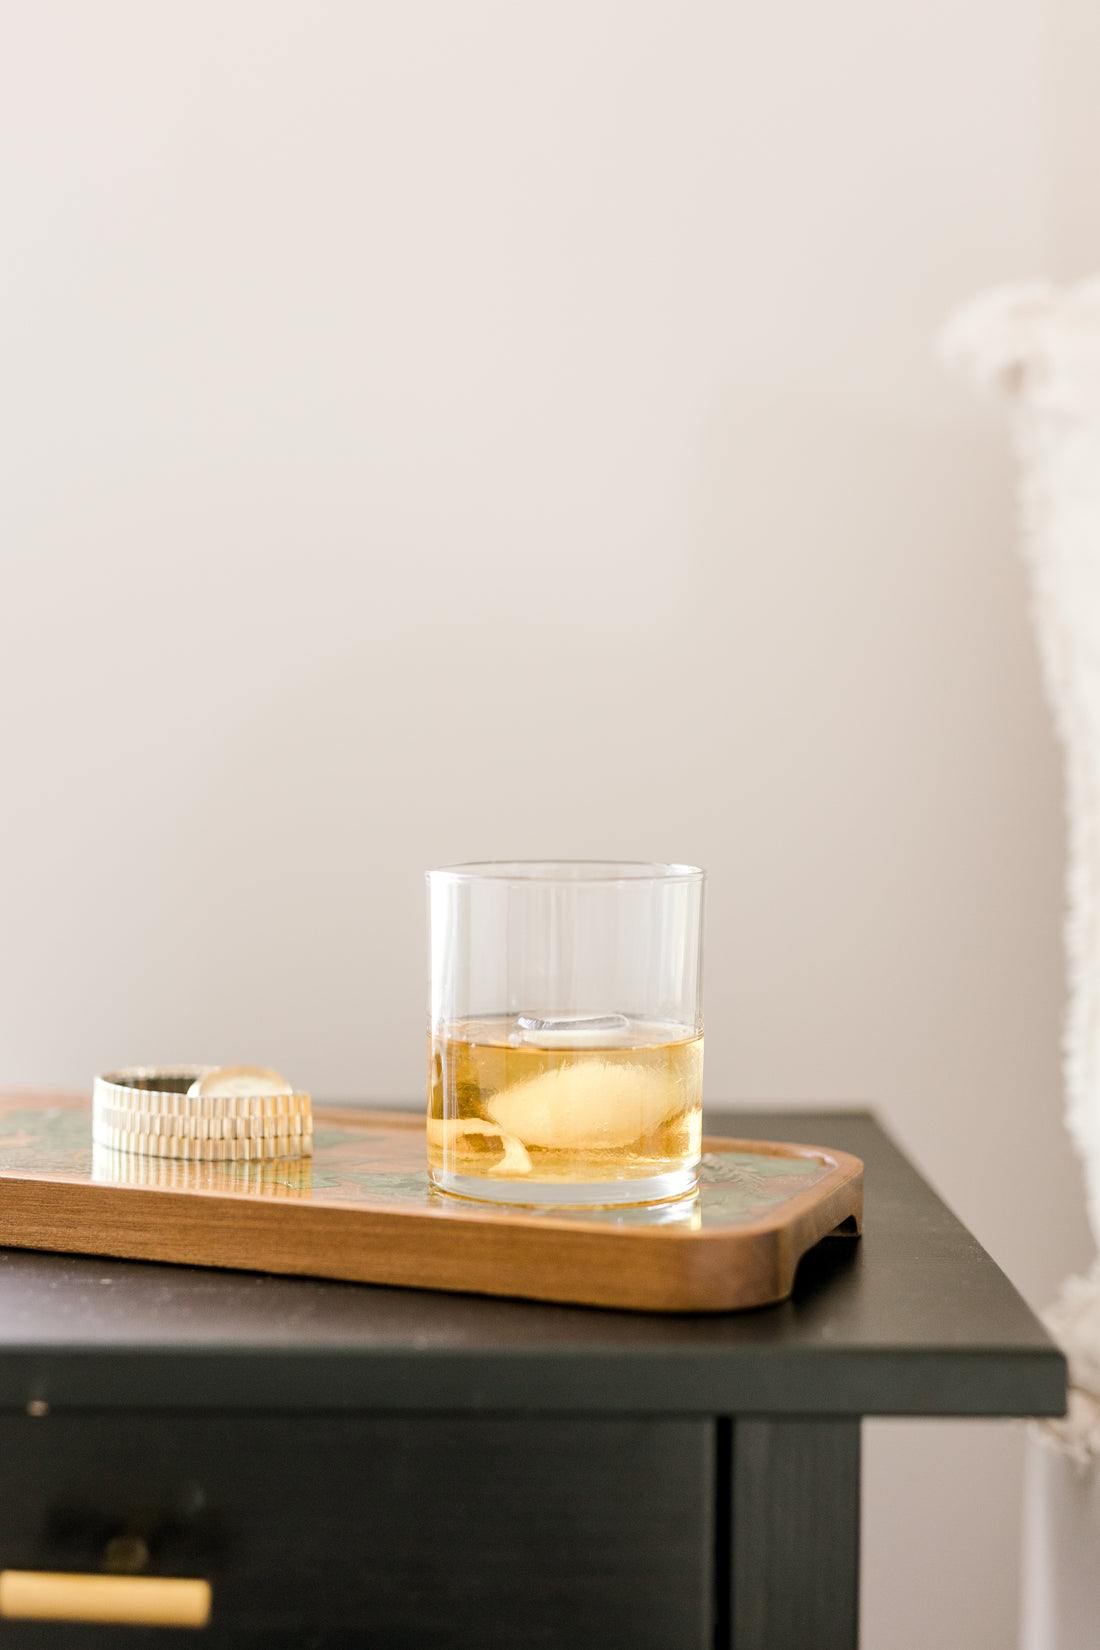 Showcasing wooden resin tray on night stand